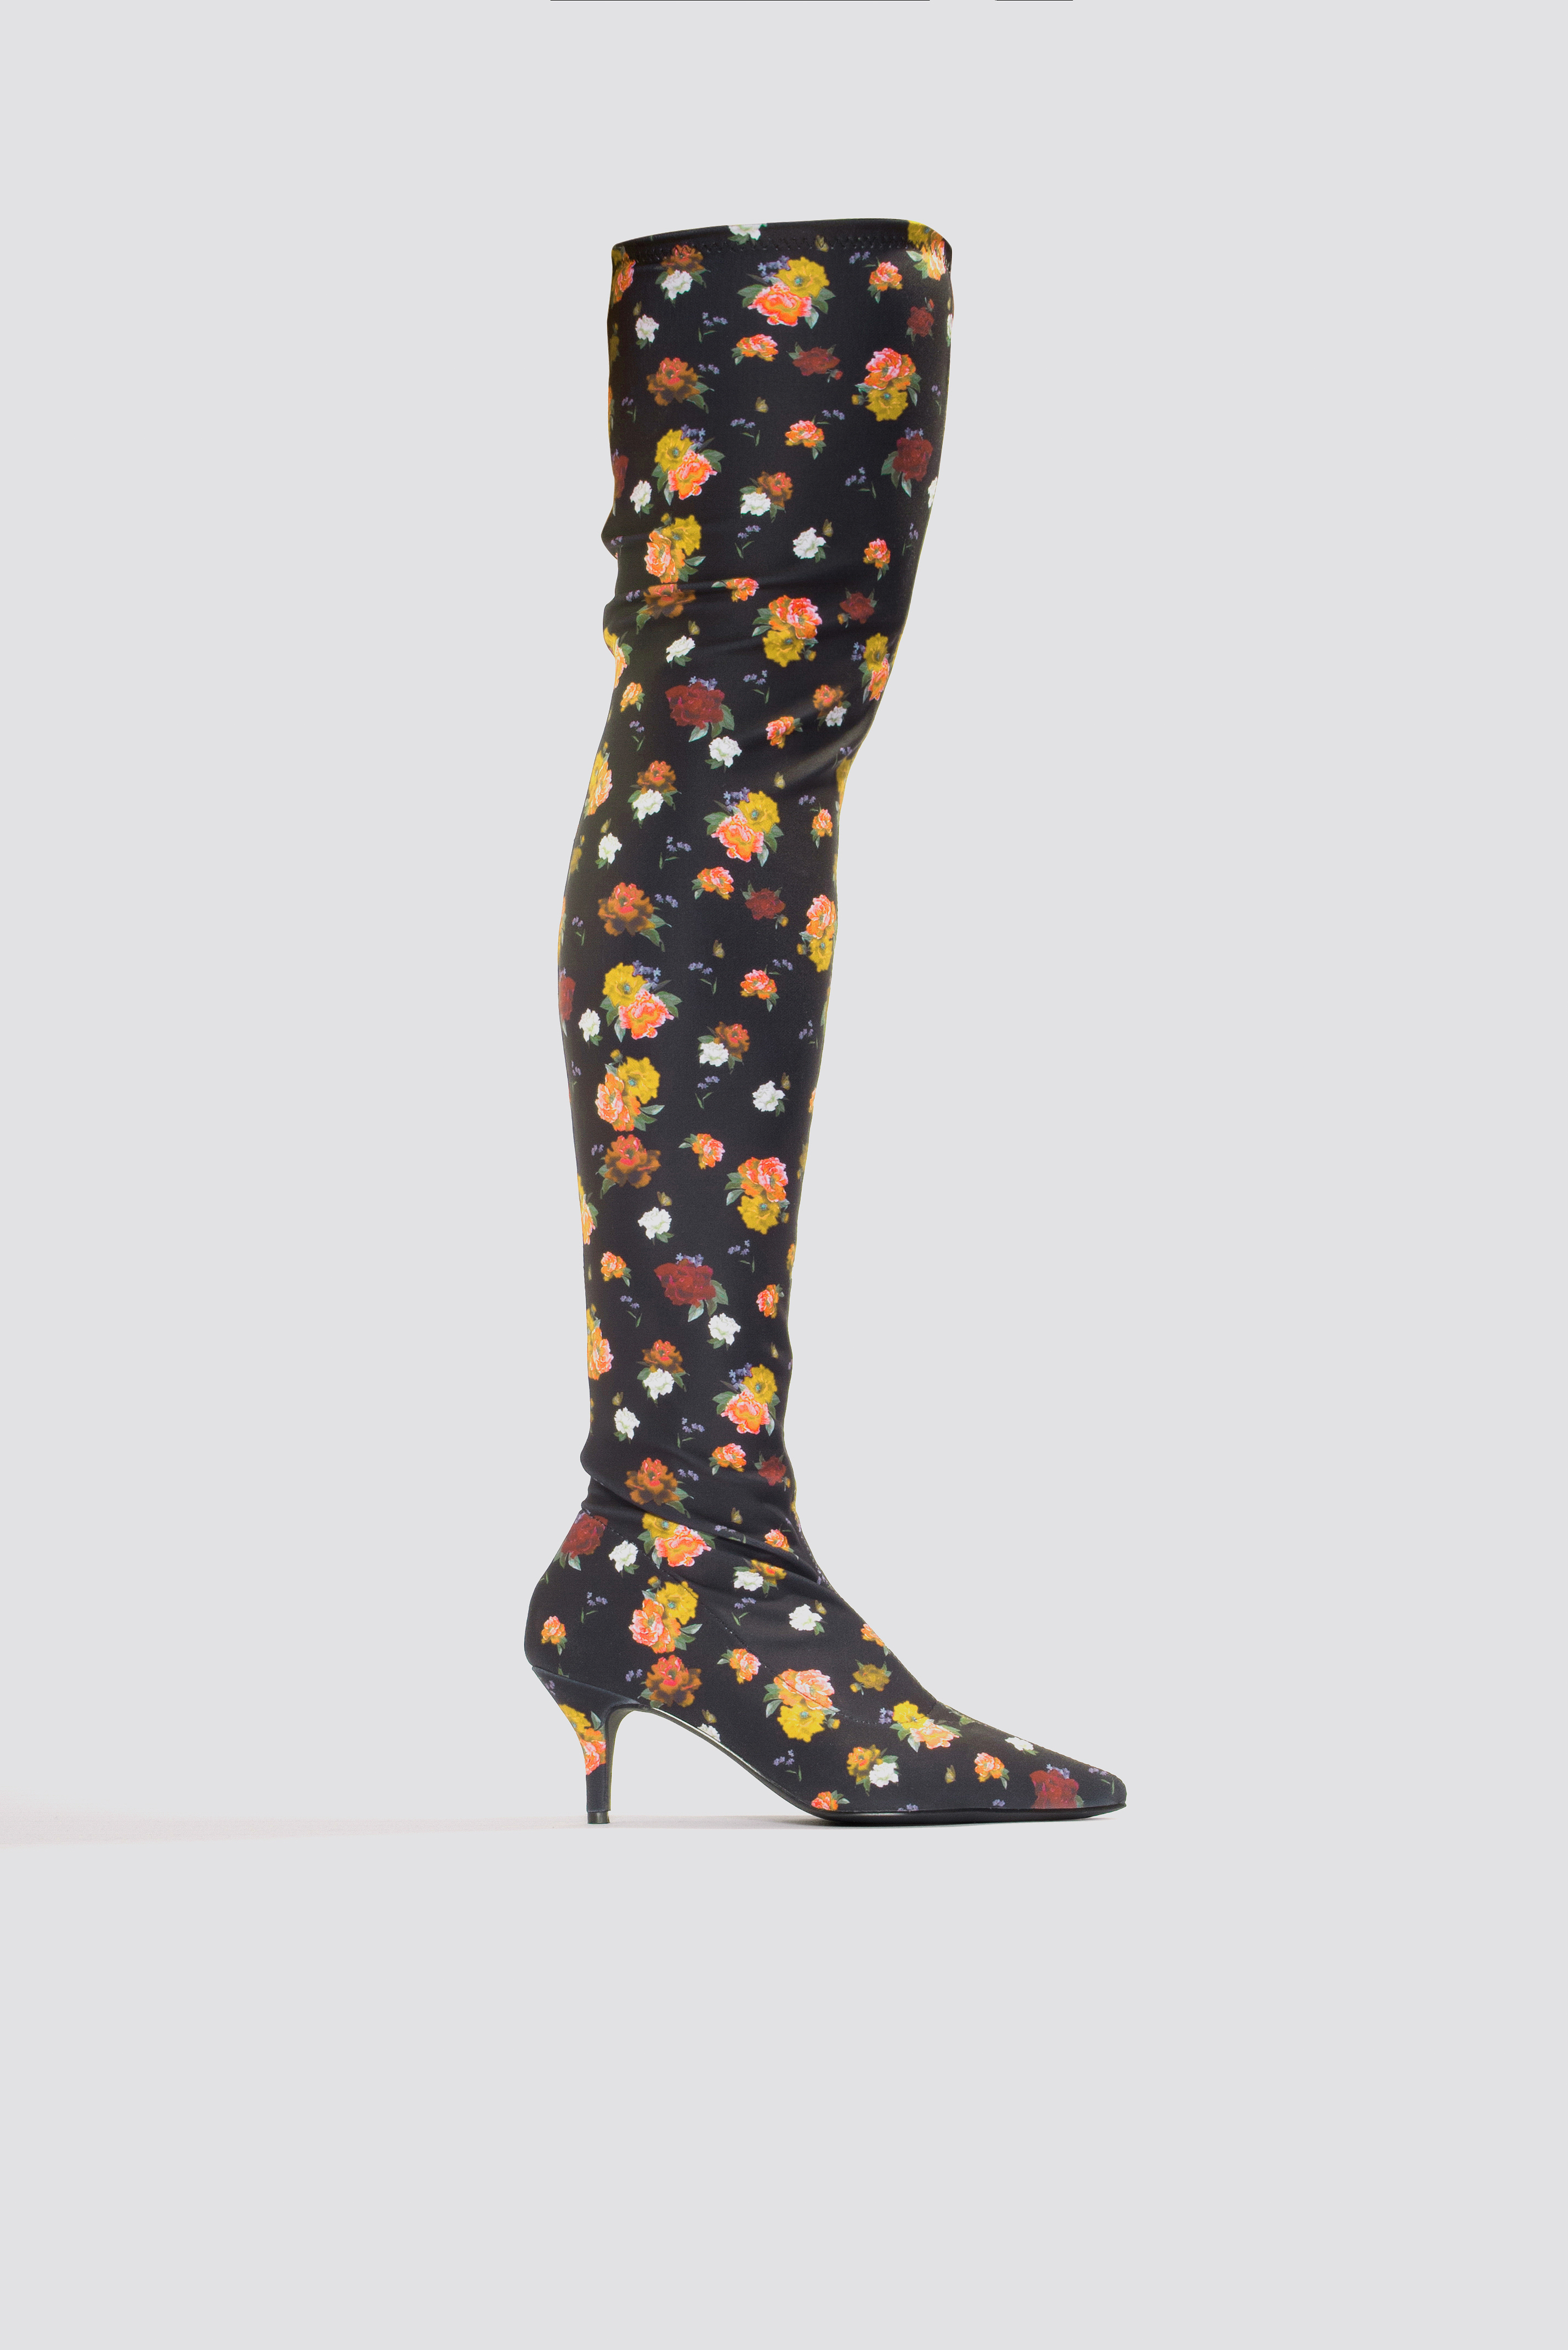 Na-kd Shoes Knee High Kitten Heel Boots - Multicolor Https://www.na-kd.com/poqcolorimages/multicolor.png